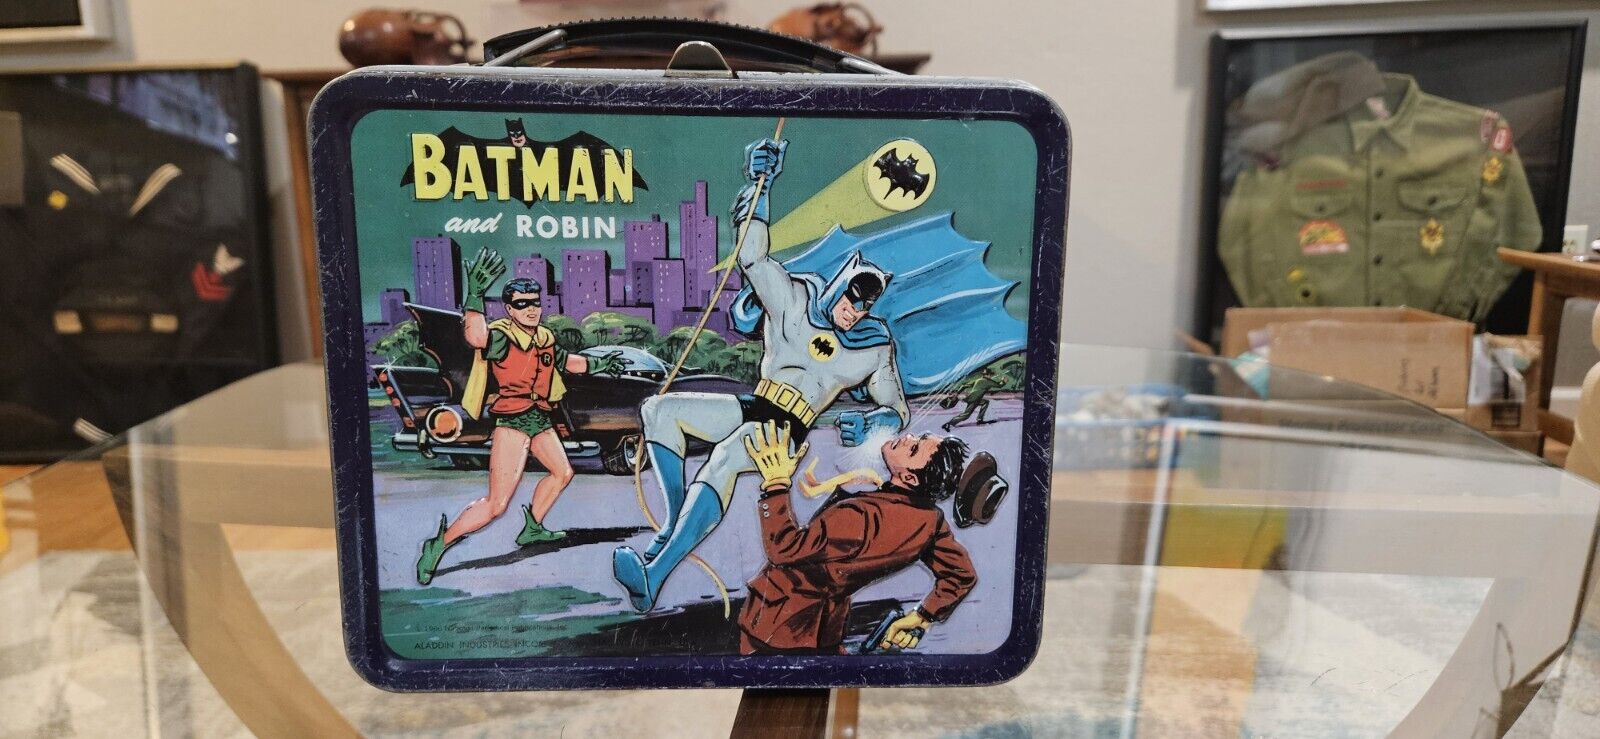 VINTAGE 1966 BATMAN AND ROBIN METAL LUNCHBOX LUNCH BOX BY ALADDIN NO THERMOS